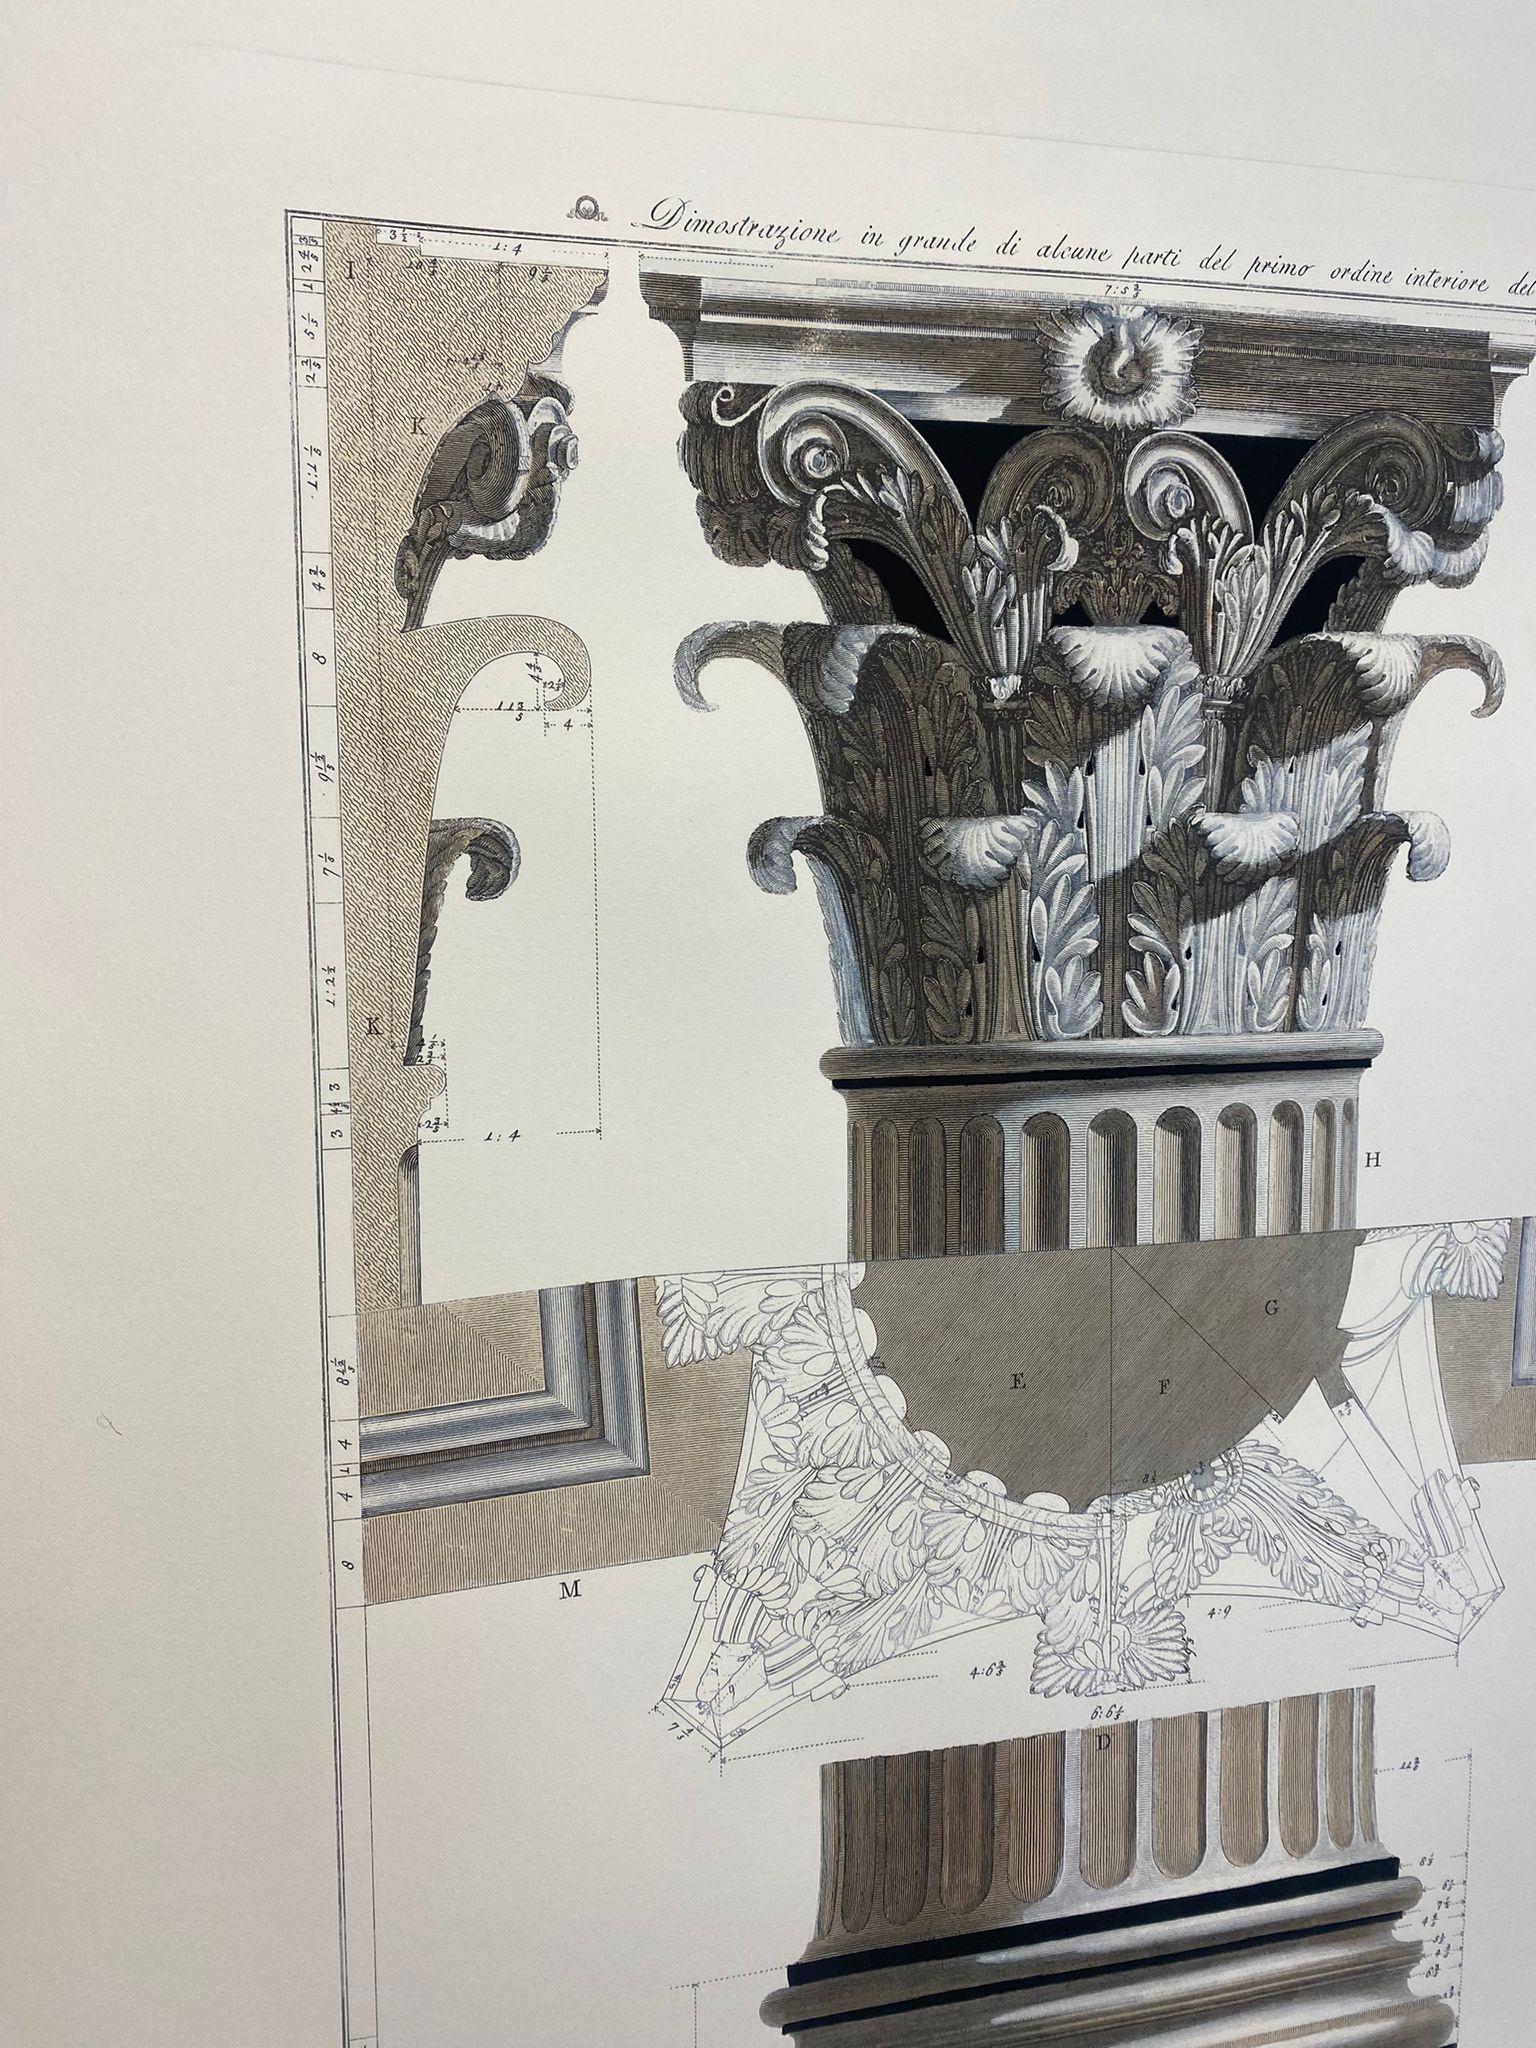 Elegant and refined print representing architectural details of the famous Pantheon, with plans, sections, elevations of capitals and columns, architraves and cornices, with particular attention to the mouldings. All enhanced by the beautiful